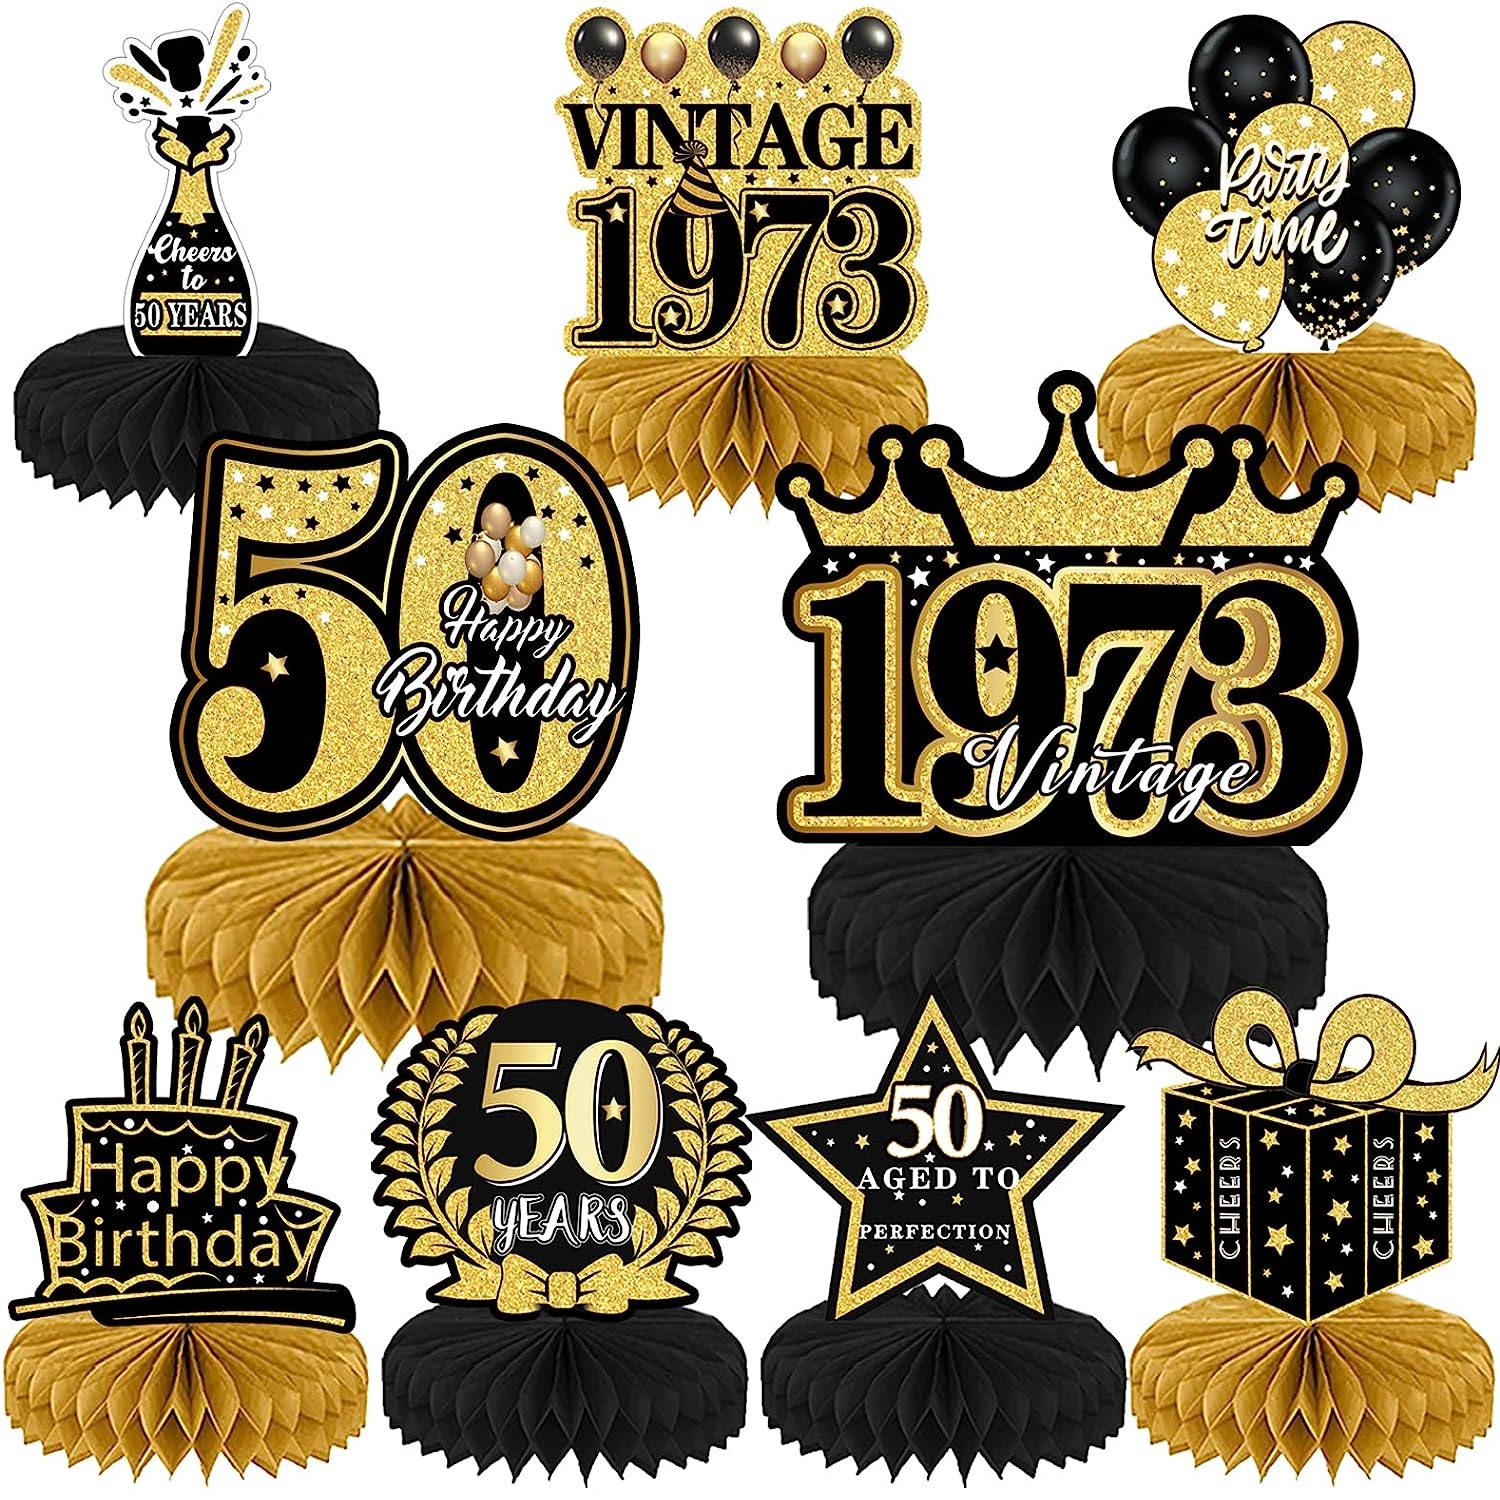 50th Birthday Table Decorations,honeycomb Centerpiece Table Decorations For  Men,42 Pcs Black Gold Perfection Table Centerpiece Toppers Party Supplies